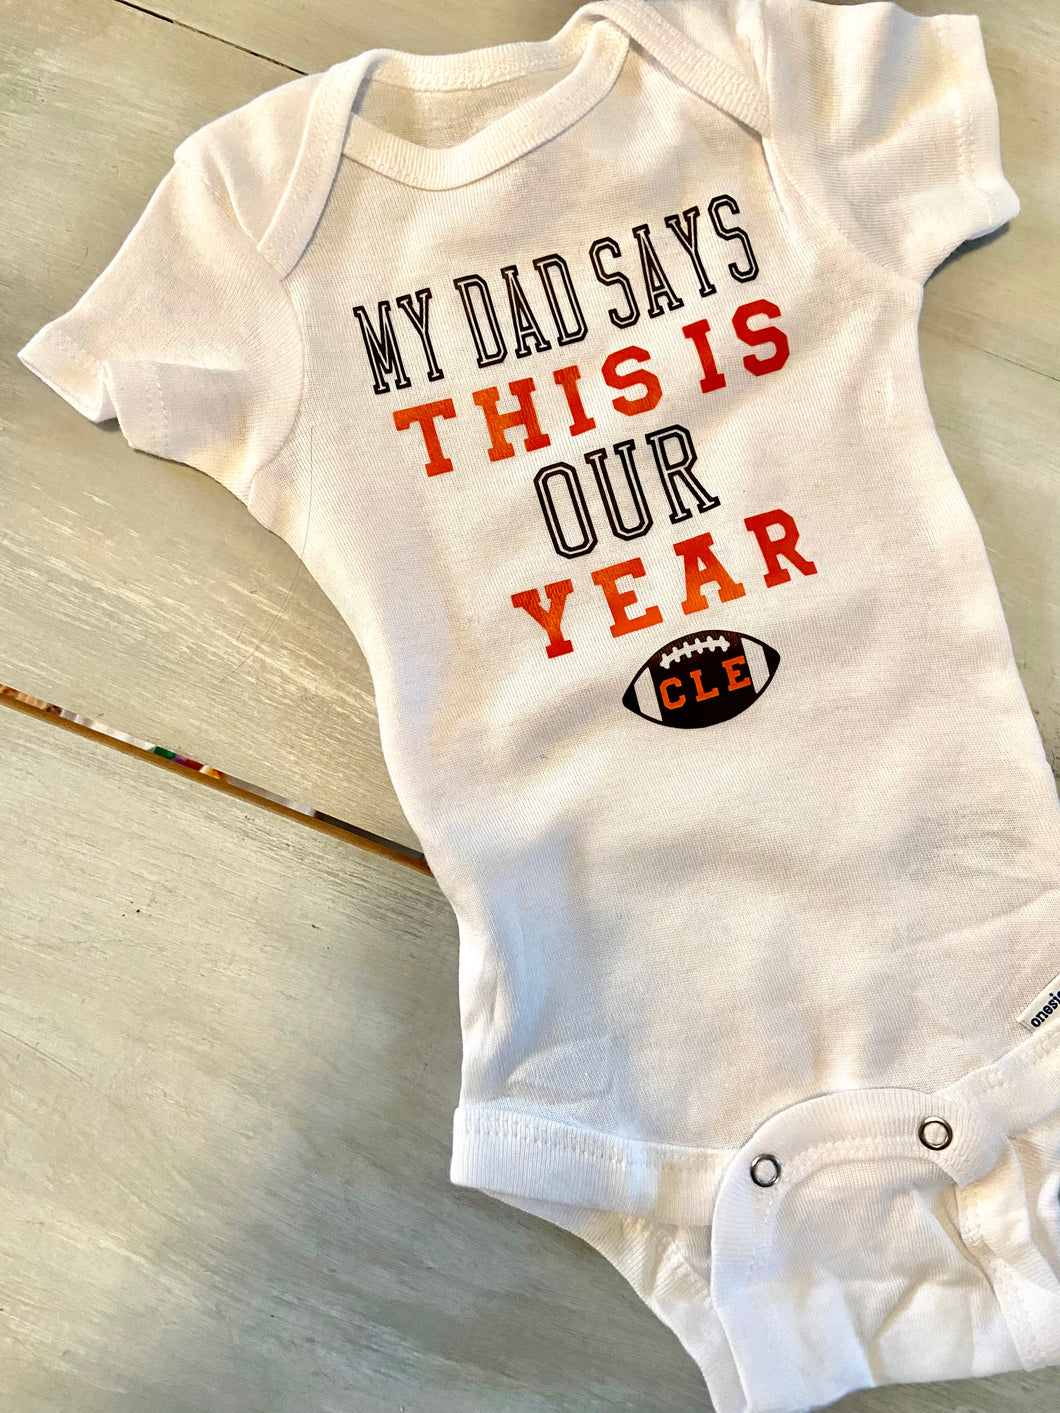 My Dad Says This Is Our Year Onesie/Tee